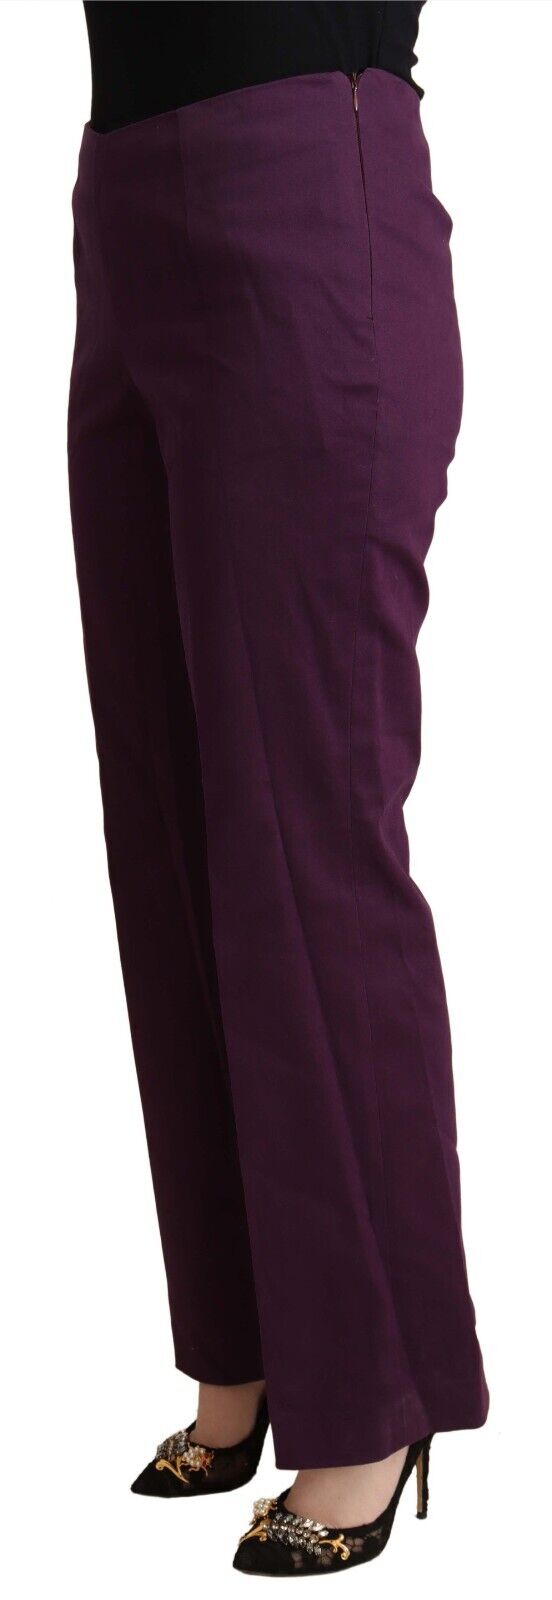 BENCIVENGA Violet High Waist Tapered Casual Pants